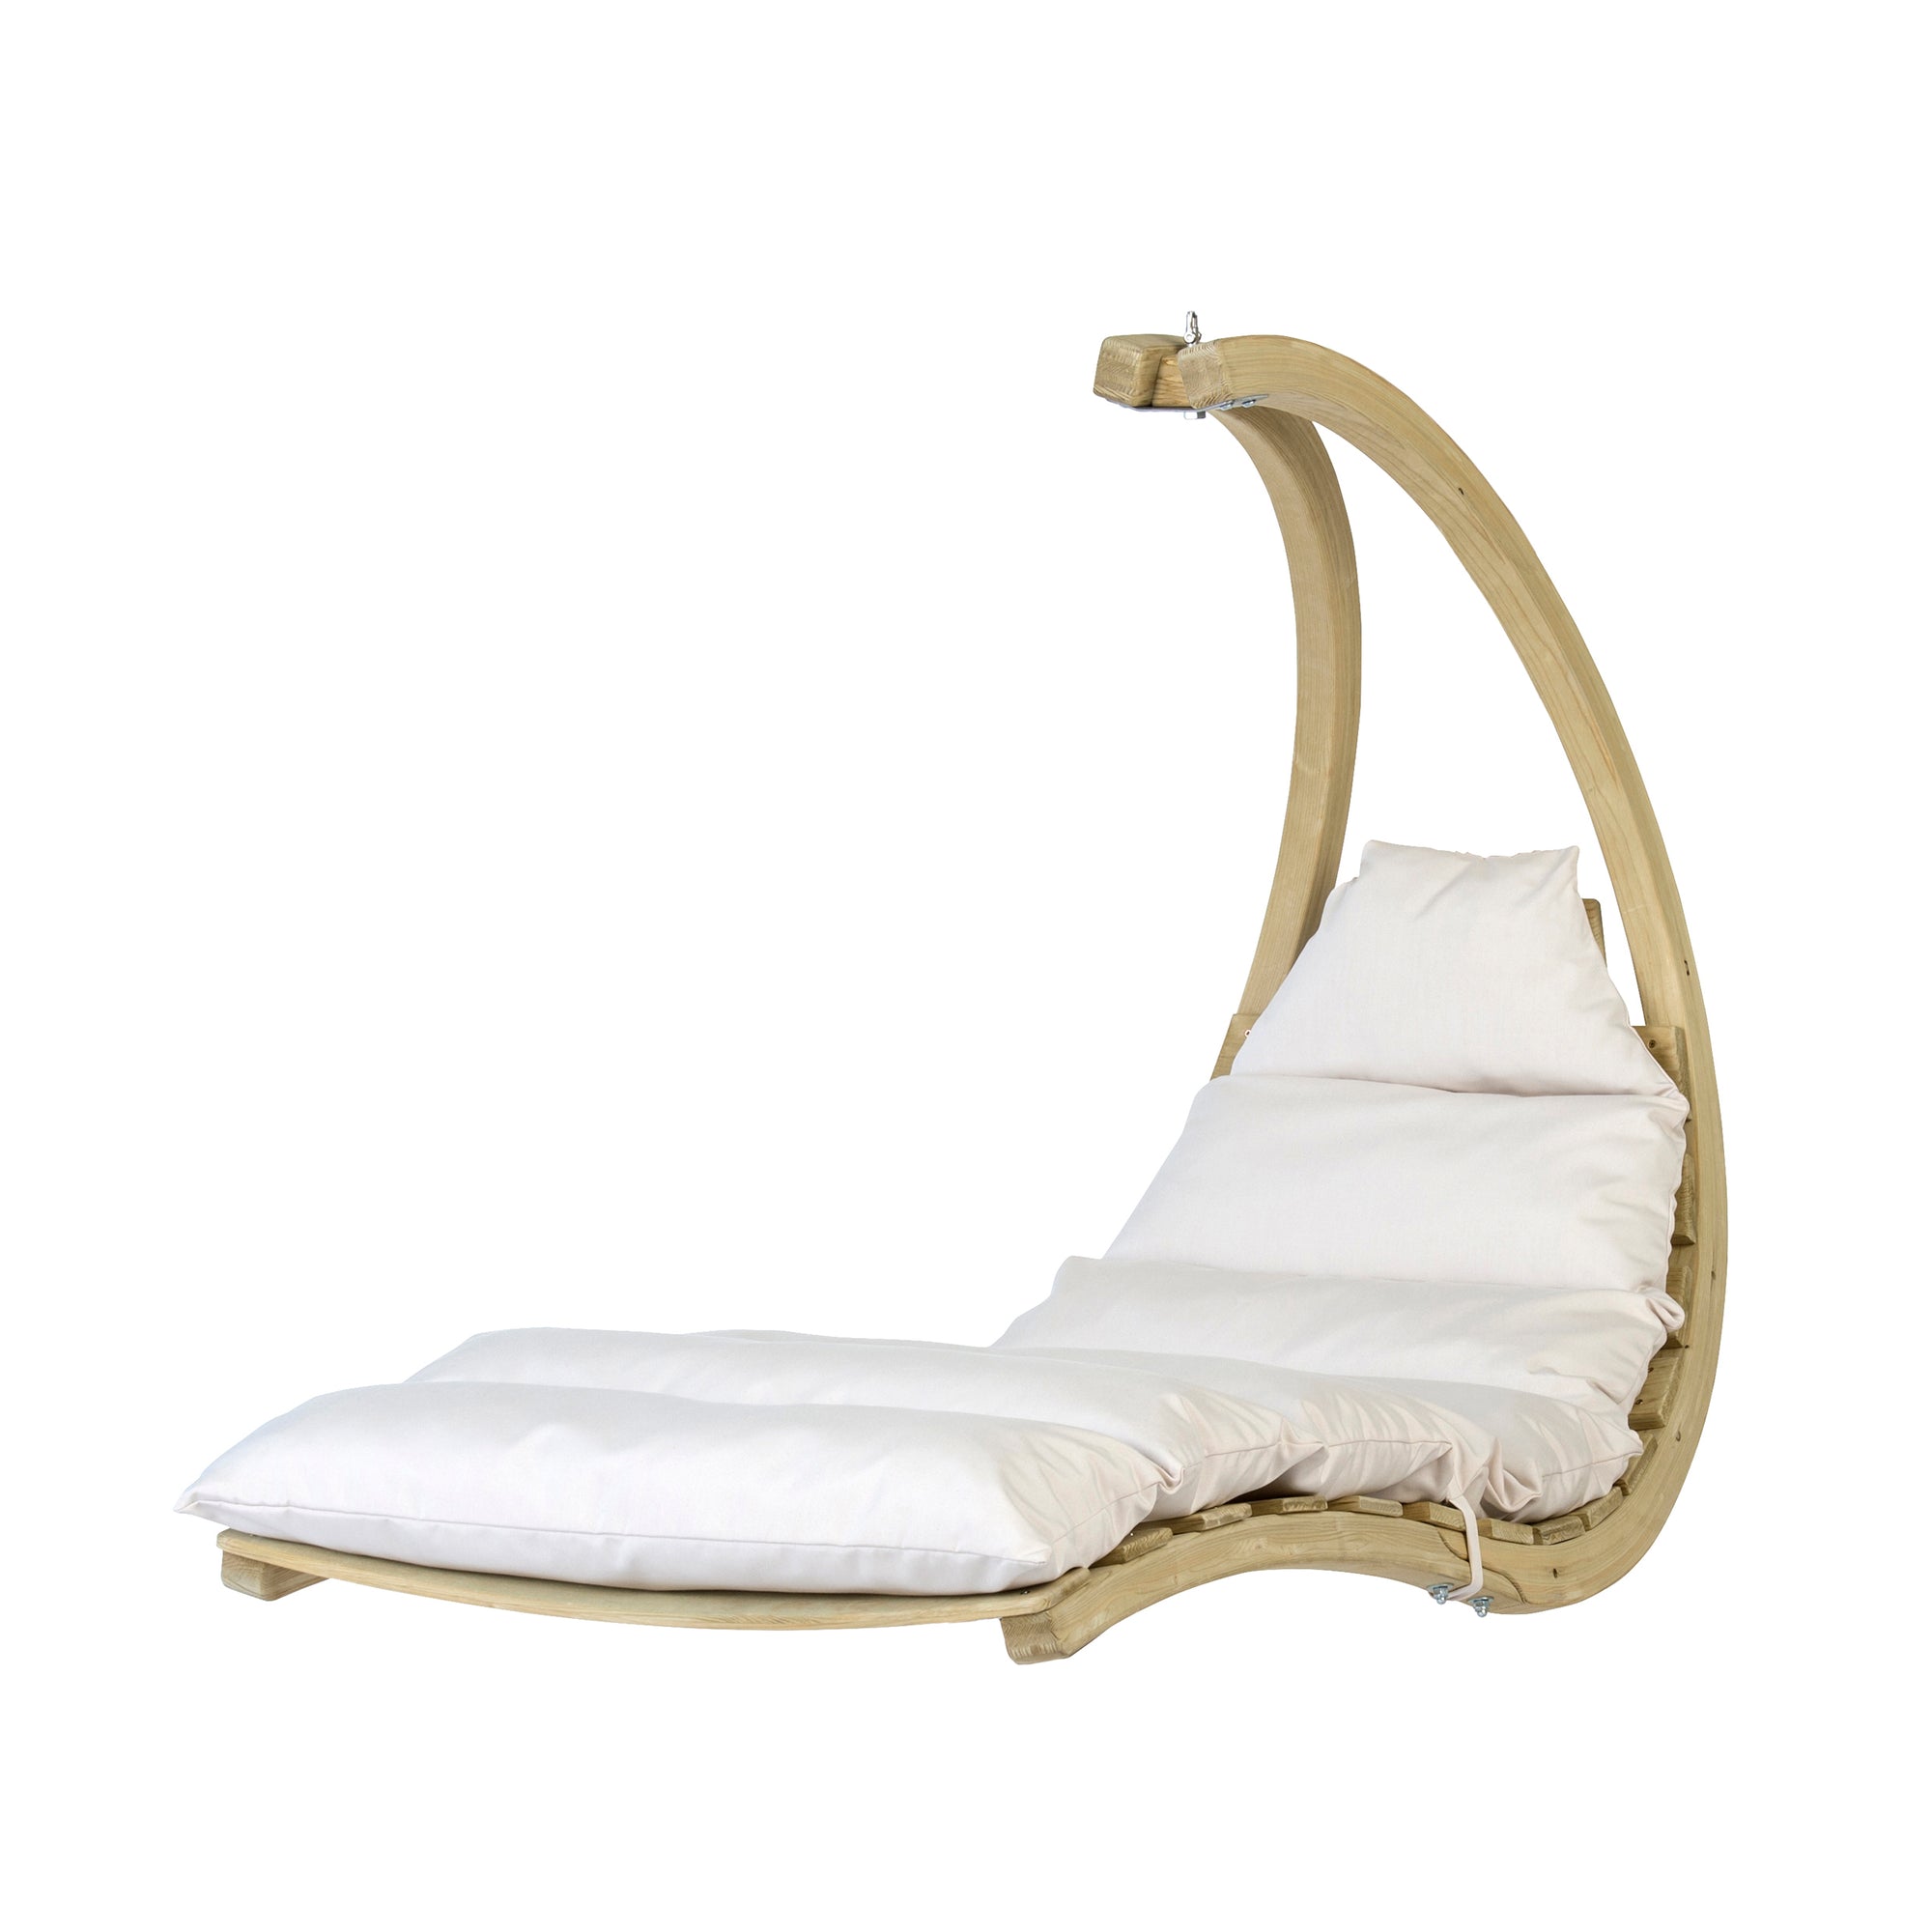 Swing Lounger, Anthracite/Taupe, from Byer of Maine